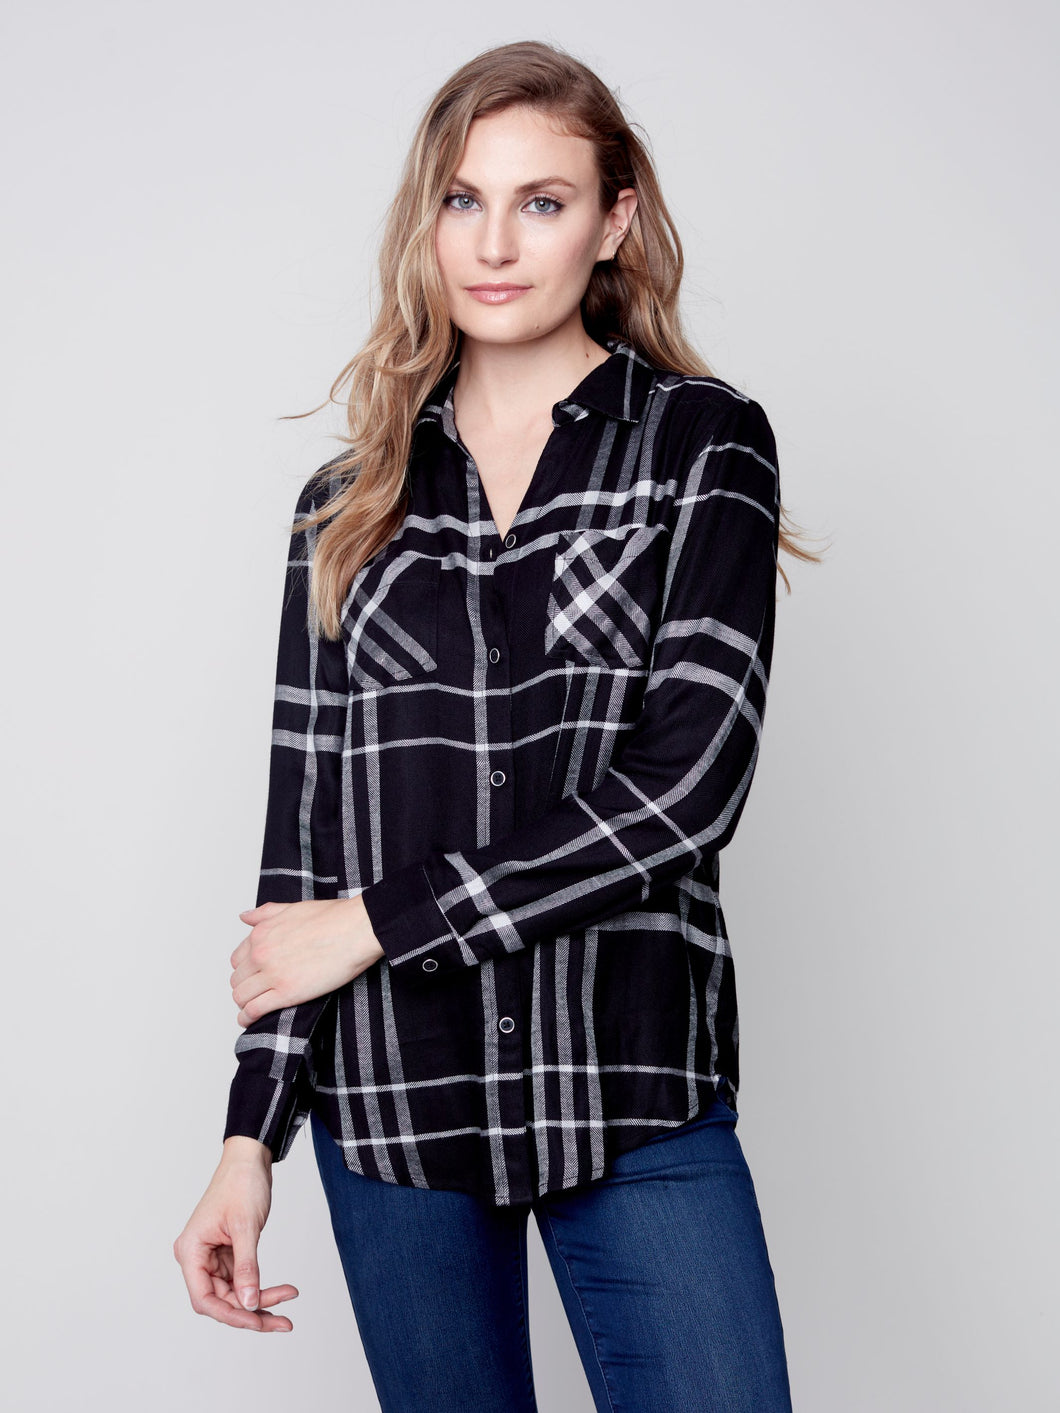 Charlie B Soft Plaid Button Down Shirt with Front Pockets in Port or Black